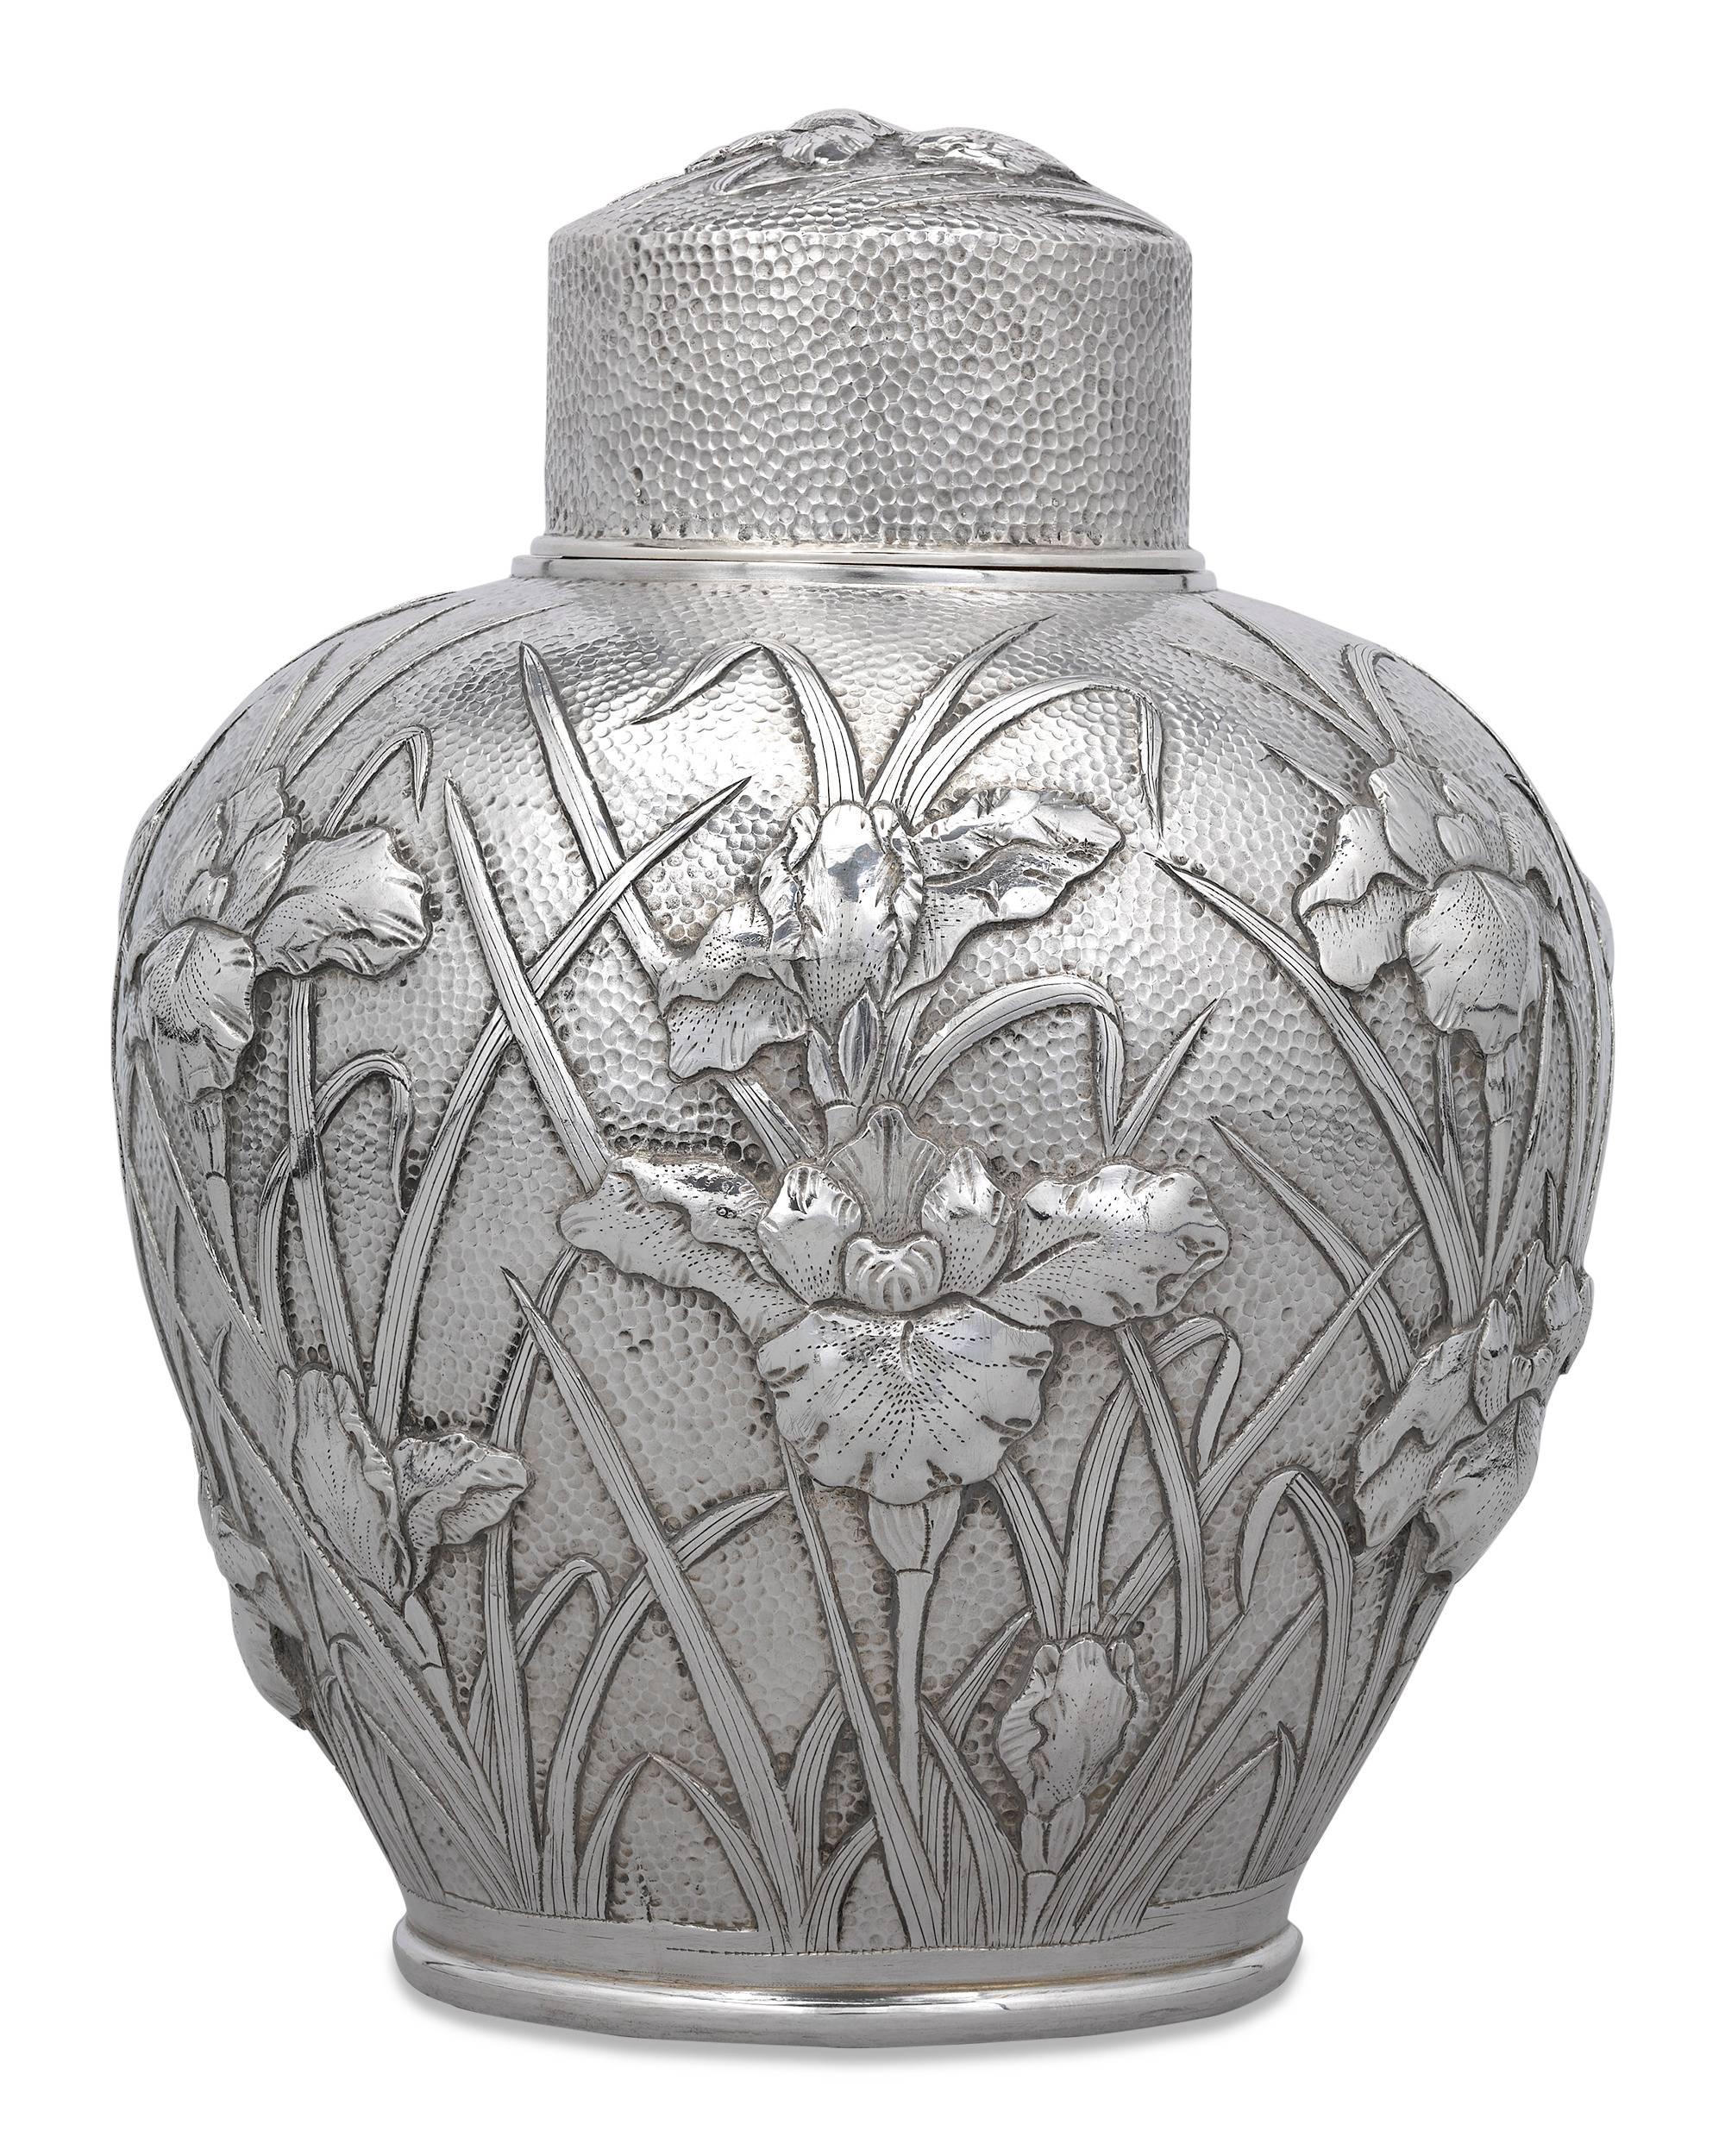 These exceptional Japanese silver tea canisters were crafted during Japan's highly creative Meiji period. The impeccable pair feature an intricate design of irises in high relief wrapped continuously around the canisters' hammered exteriors.